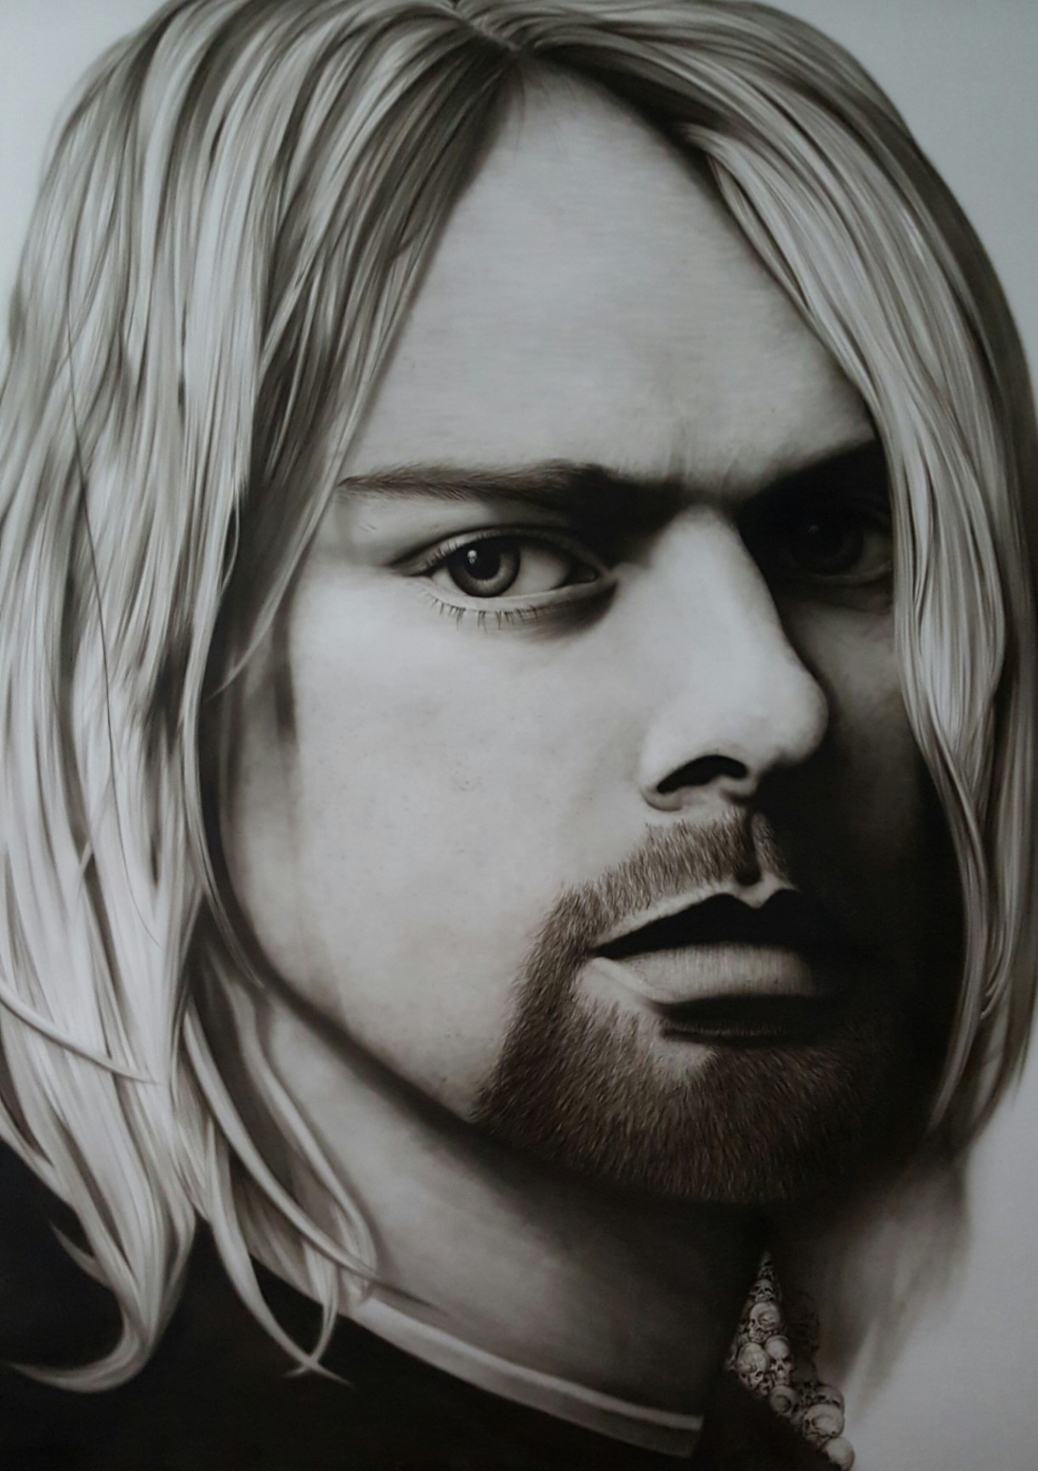 Portrait of Dave Grohl of the Foo Fighters by Artist Peter Frechette.